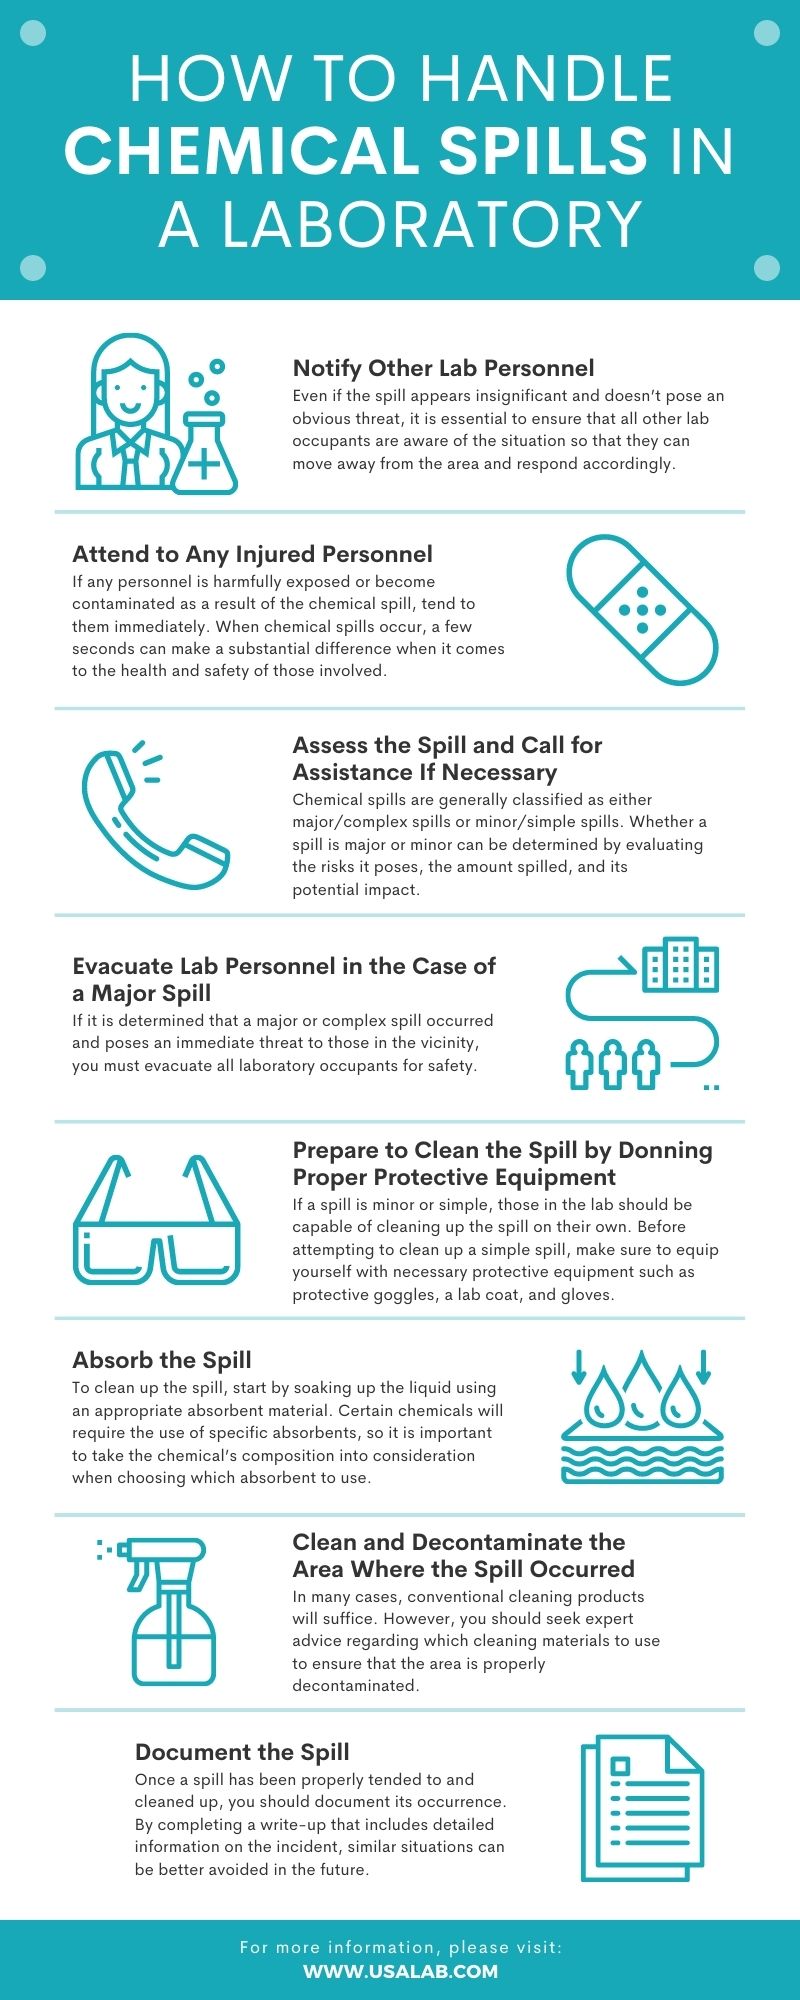 How to Handle Chemical Spills in a Laboratory Infographic
